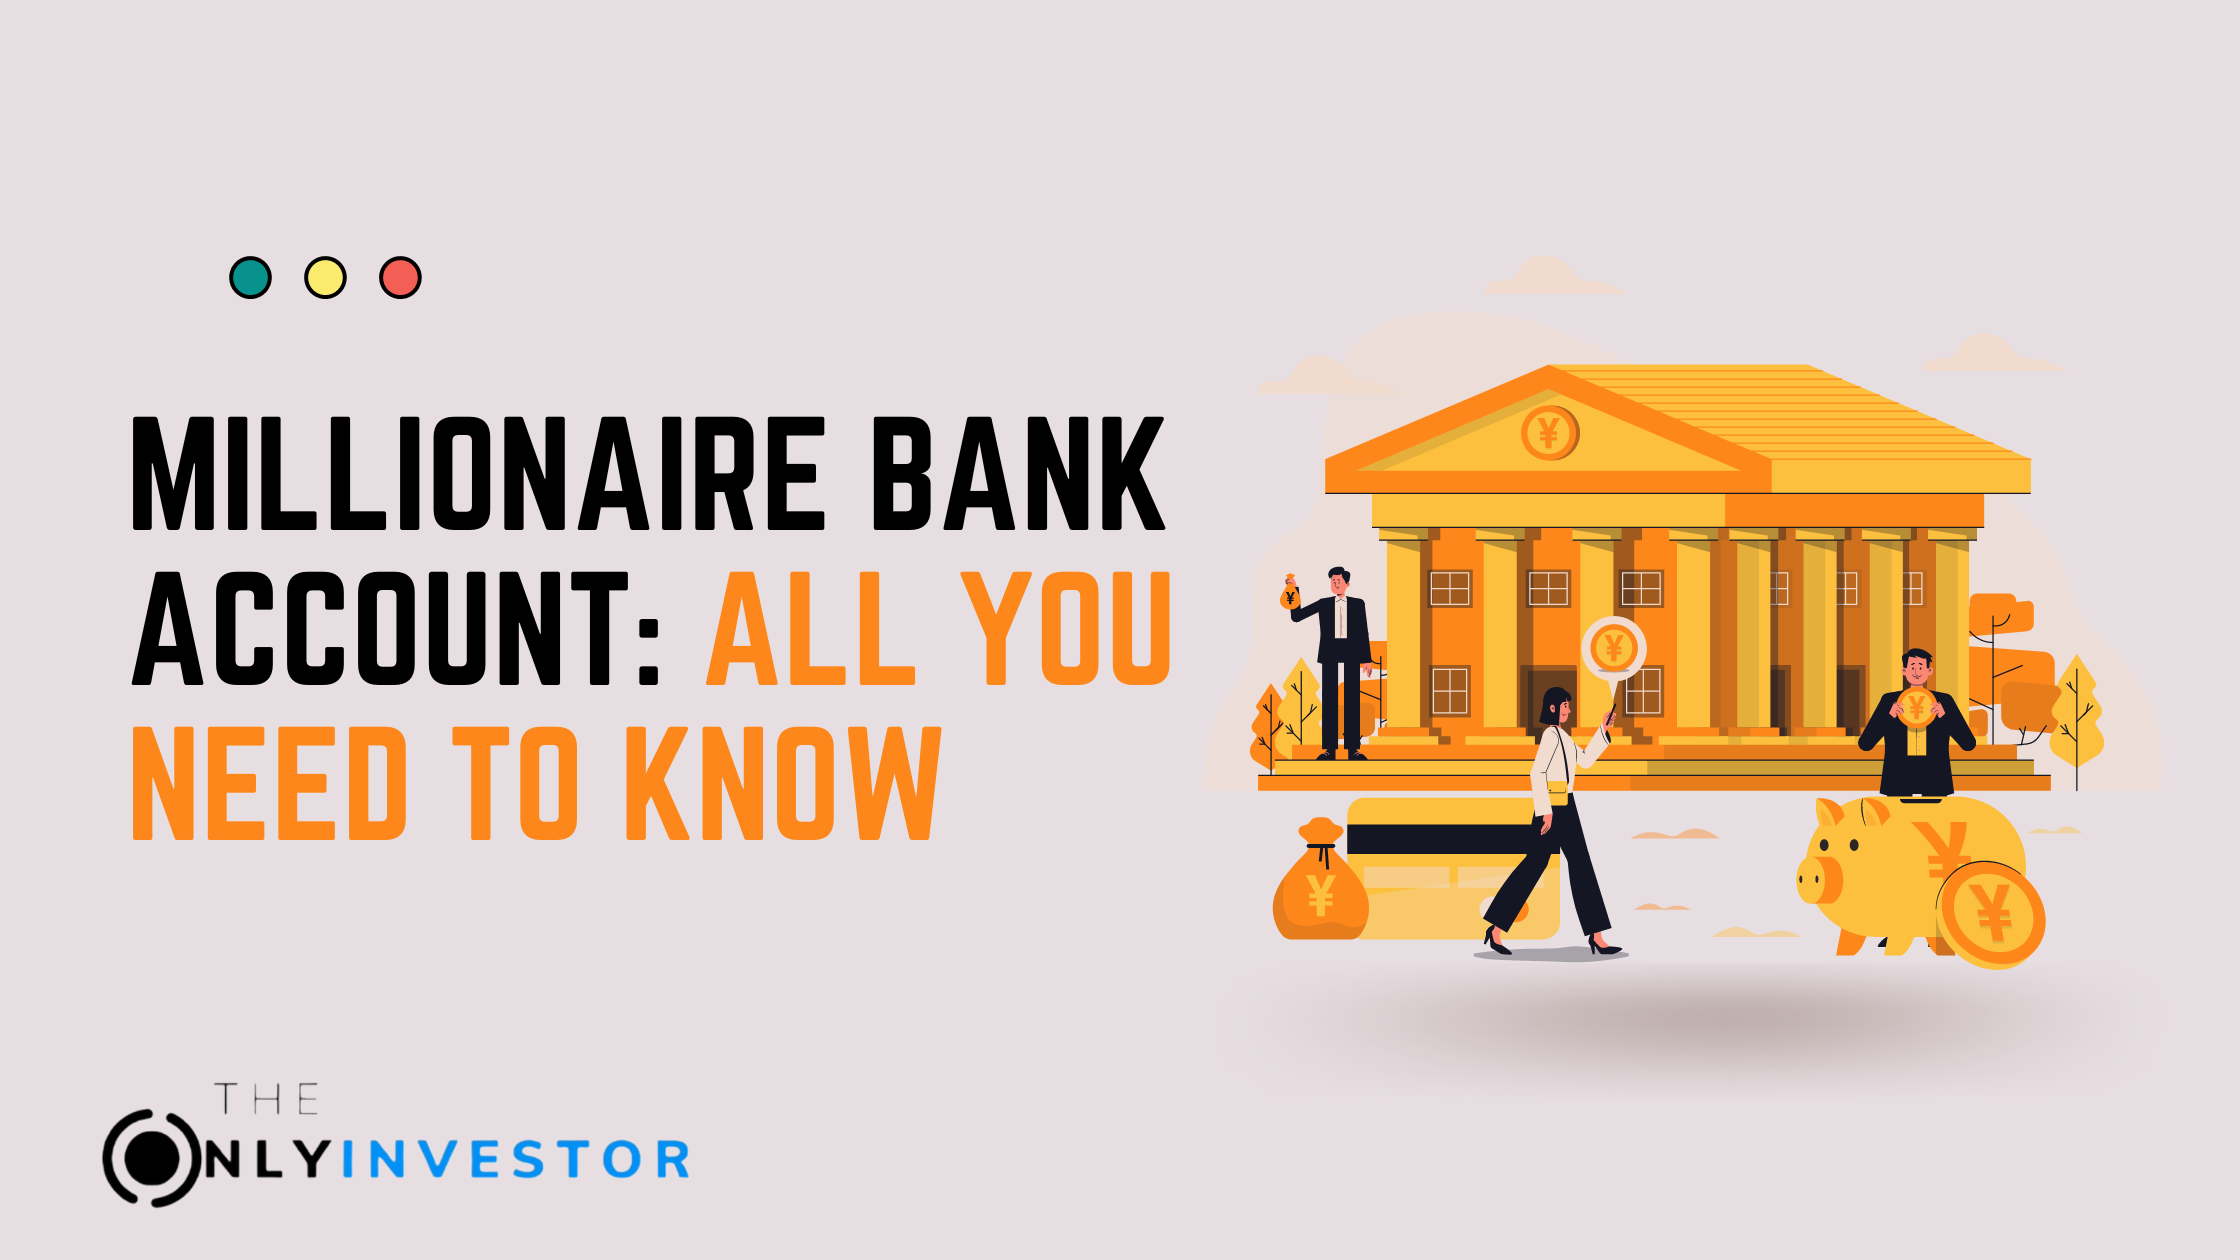 Millionaire bank account: All you need to know